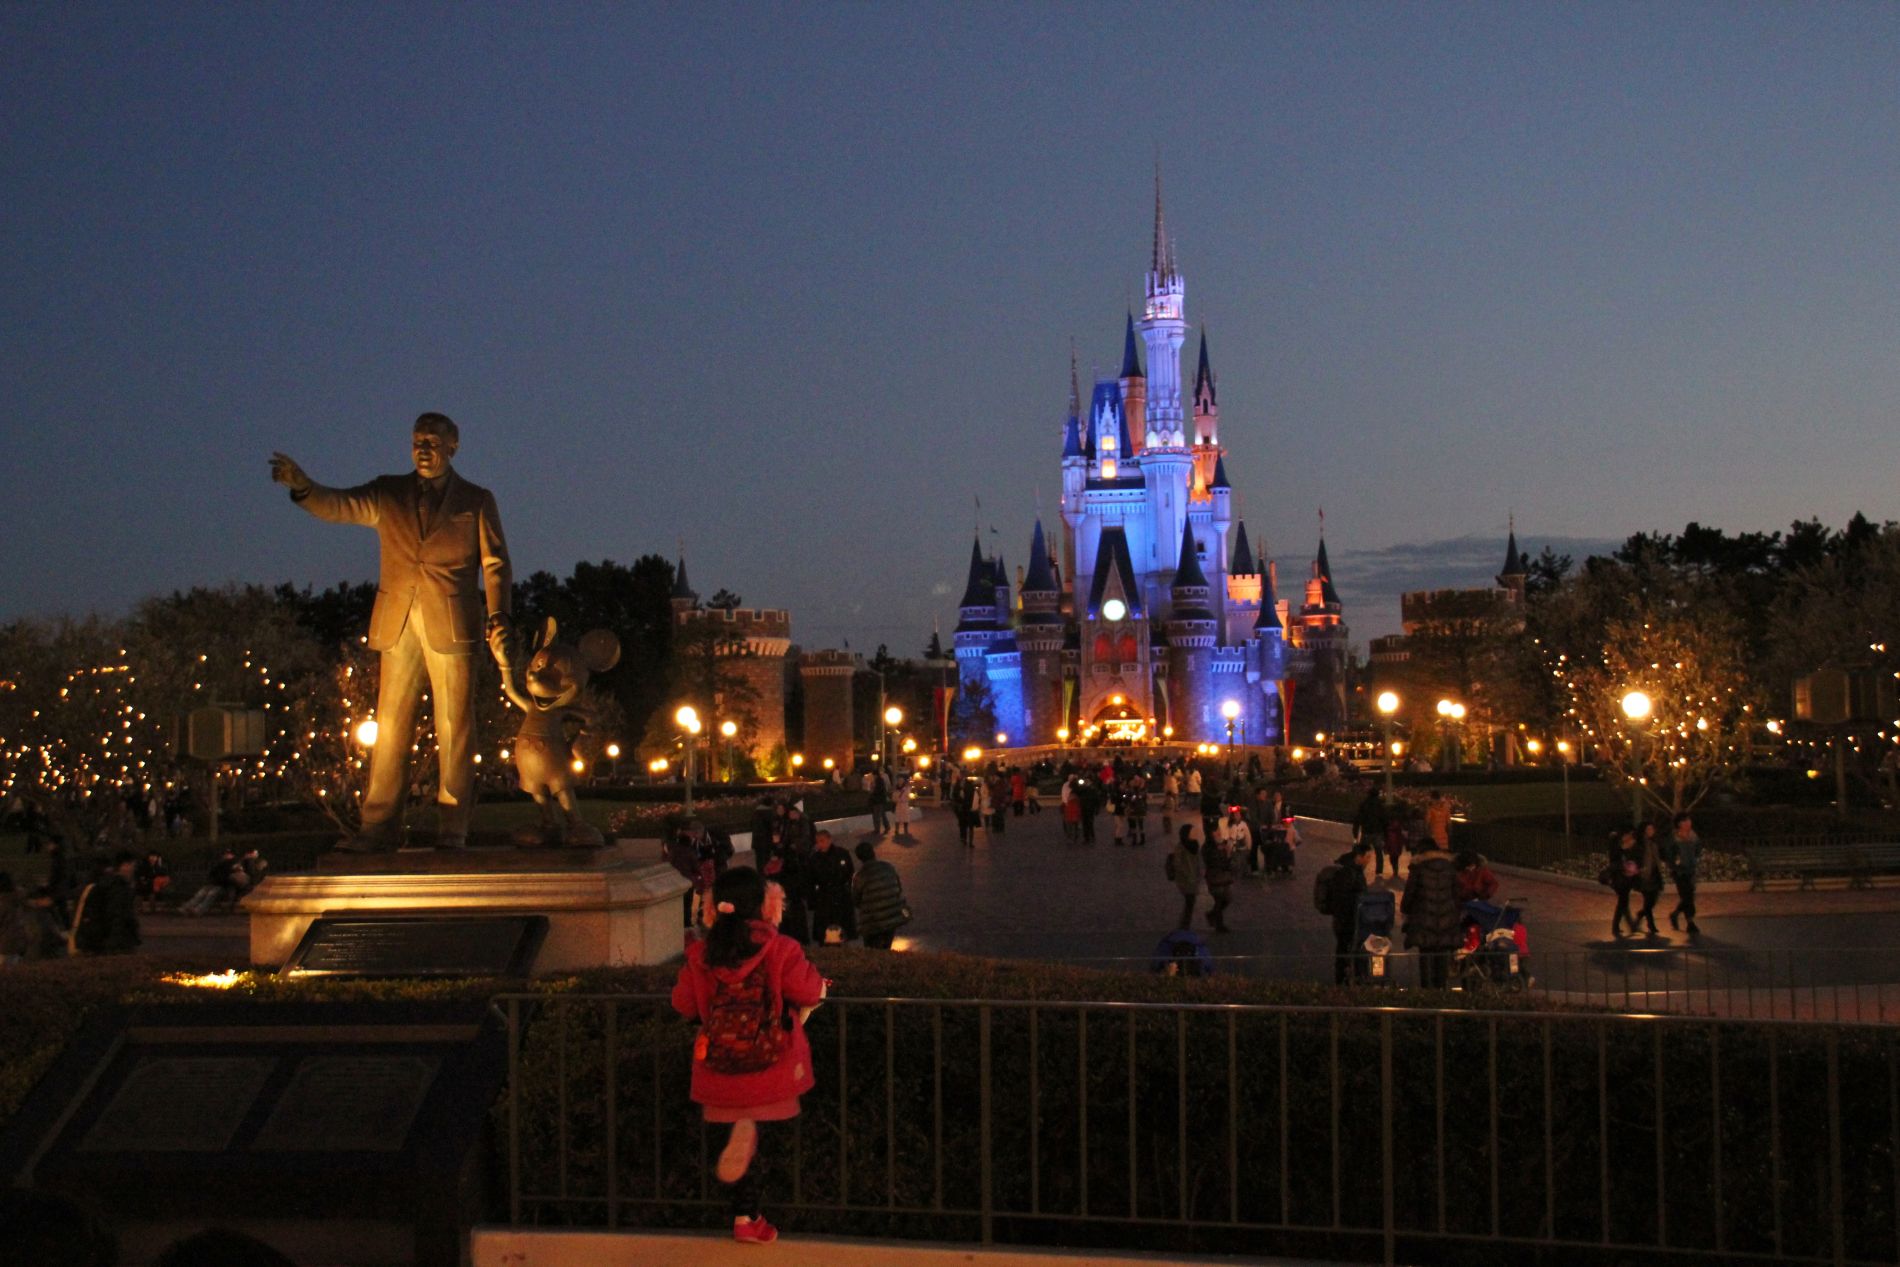 A young Japanese girl looks at Cinderella's Fairy Tale Hall in Tokyo Disneyland at night.